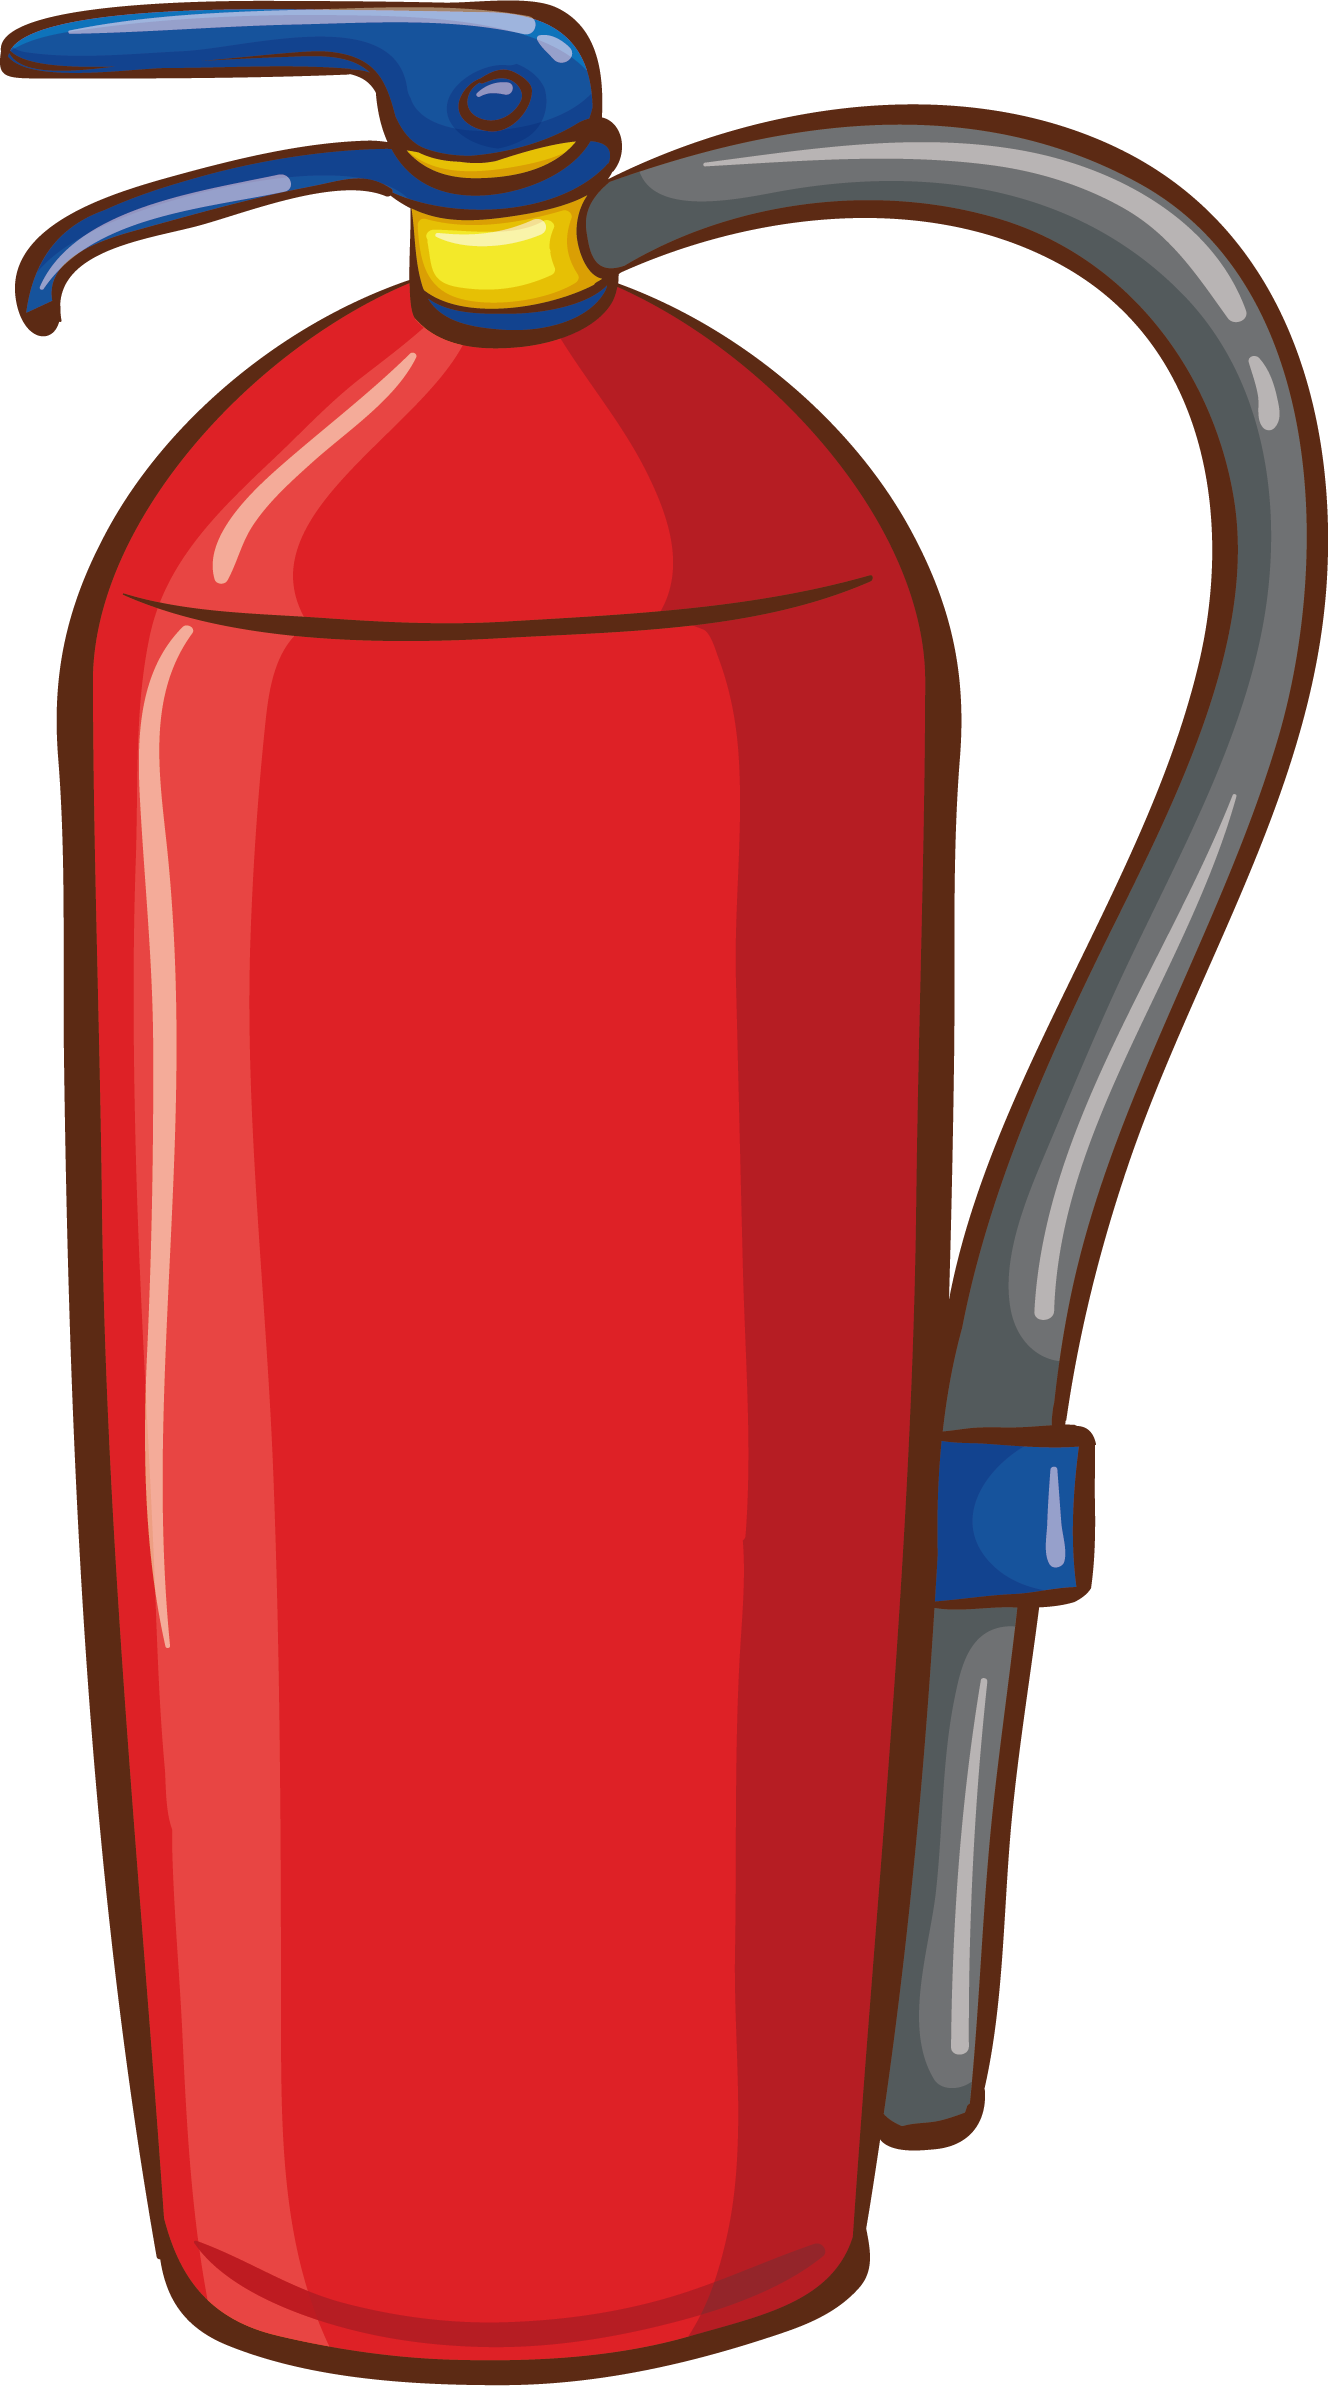 Fire Extinguisher Conflagration Icon - Fire Extinguisher Conflagration Icon (1328x2386)